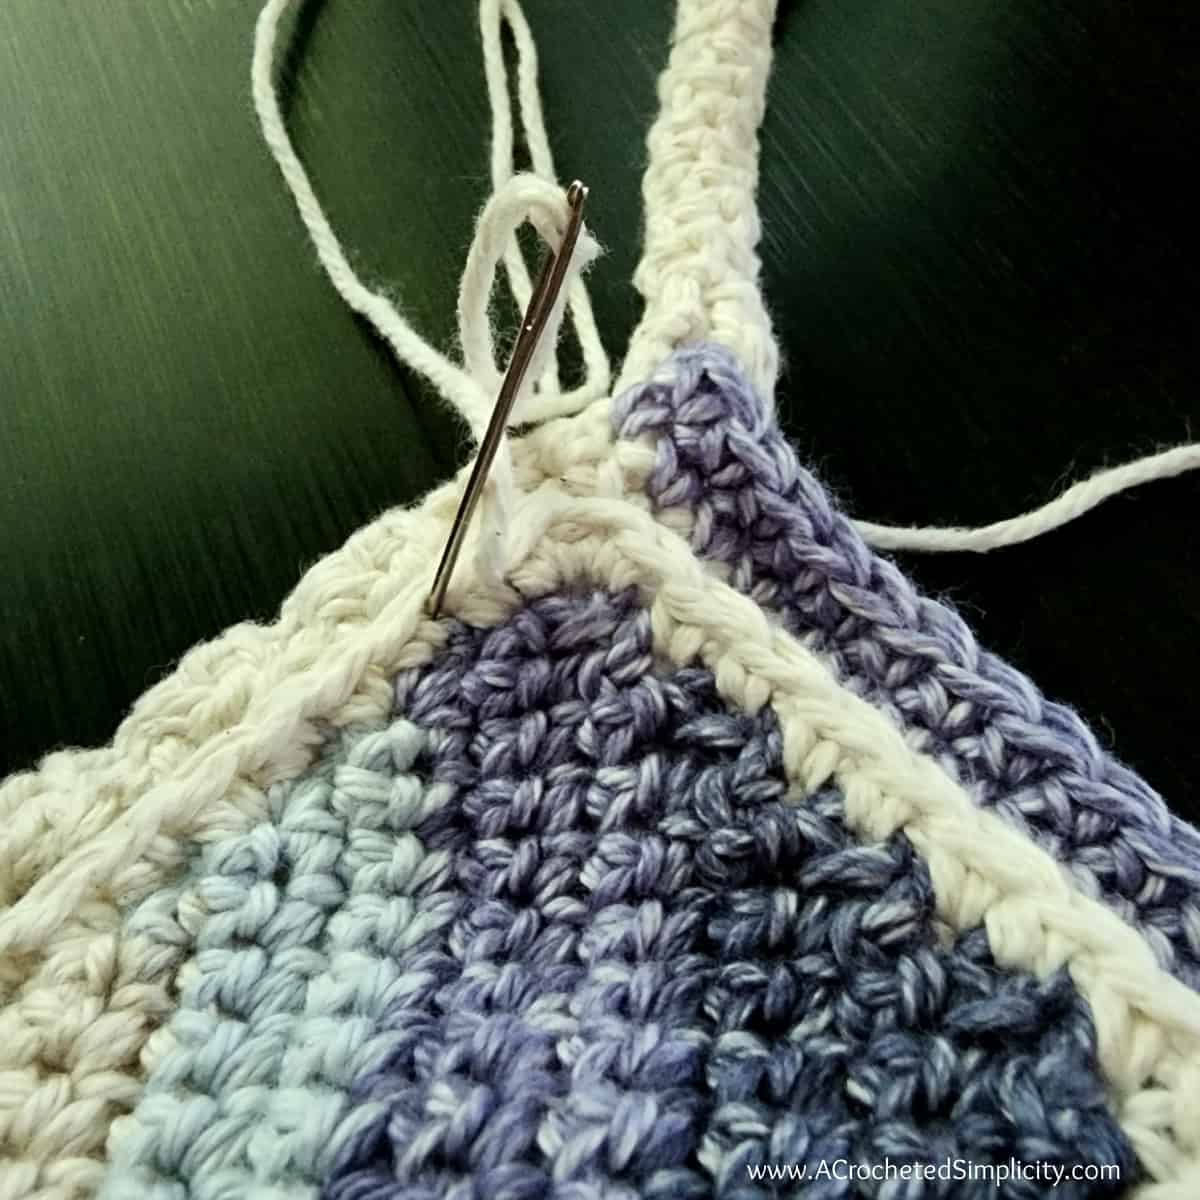 Crochet cell phone pocket being attached to the crochet water bottle holder with a yarn needle and whipstitch.